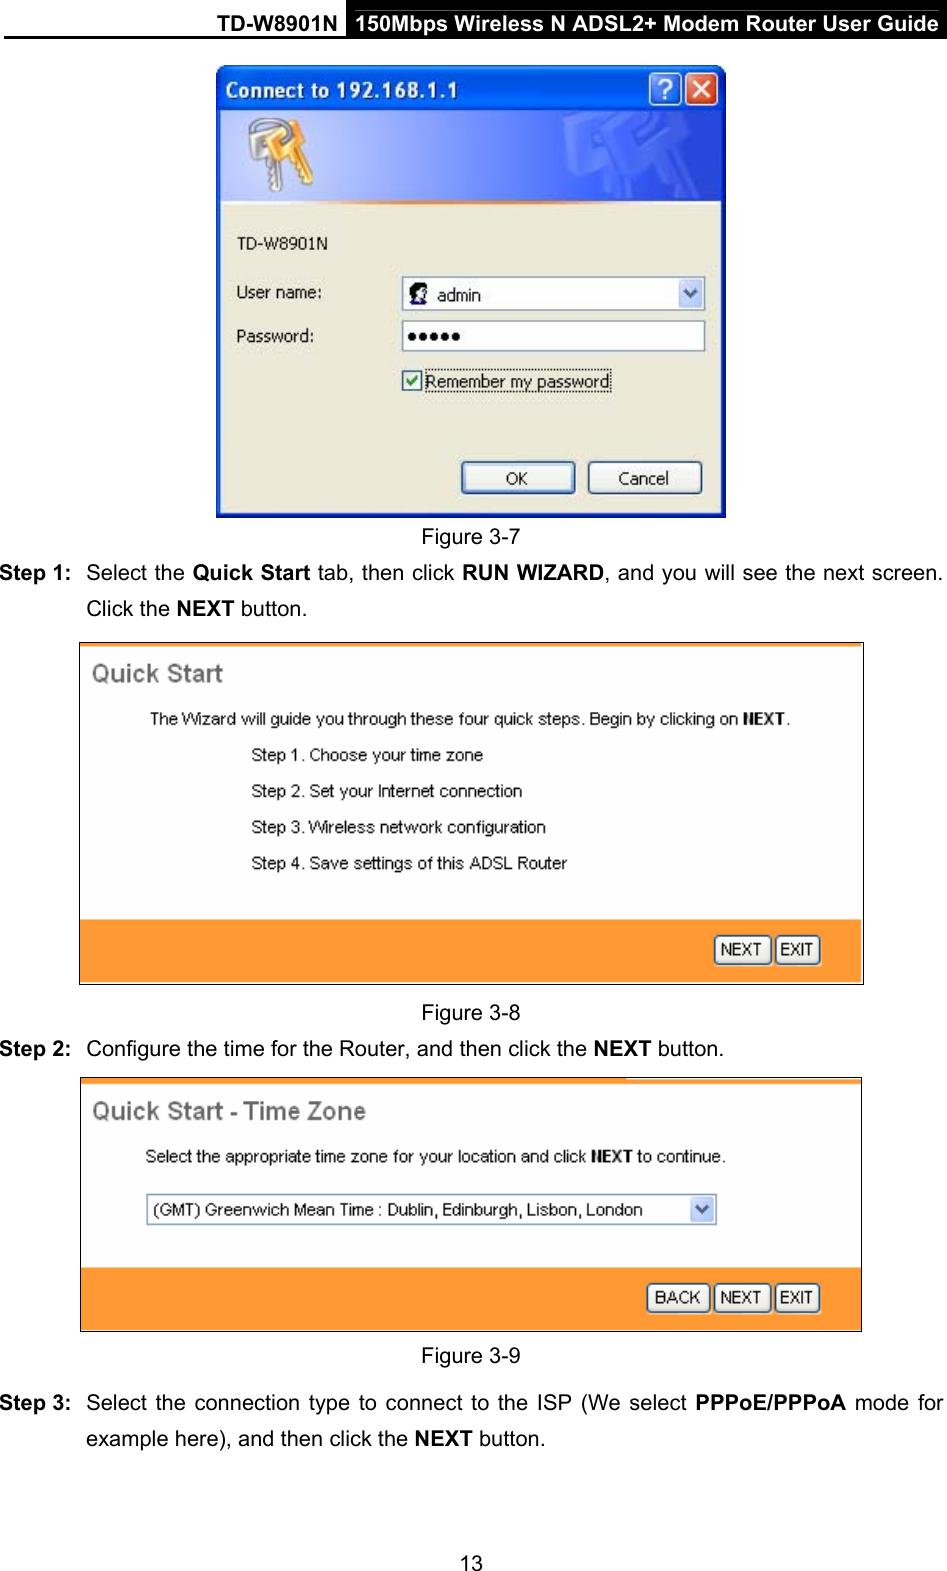 TD-W8901N  150Mbps Wireless N ADSL2+ Modem Router User Guide 13  Figure 3-7 Step 1:  Select the Quick Start tab, then click RUN WIZARD, and you will see the next screen. Click the NEXT button.  Figure 3-8 Step 2:  Configure the time for the Router, and then click the NEXT button.  Figure 3-9 Step 3:  Select the connection type to connect to the ISP (We select PPPoE/PPPoA mode for example here), and then click the NEXT button. 